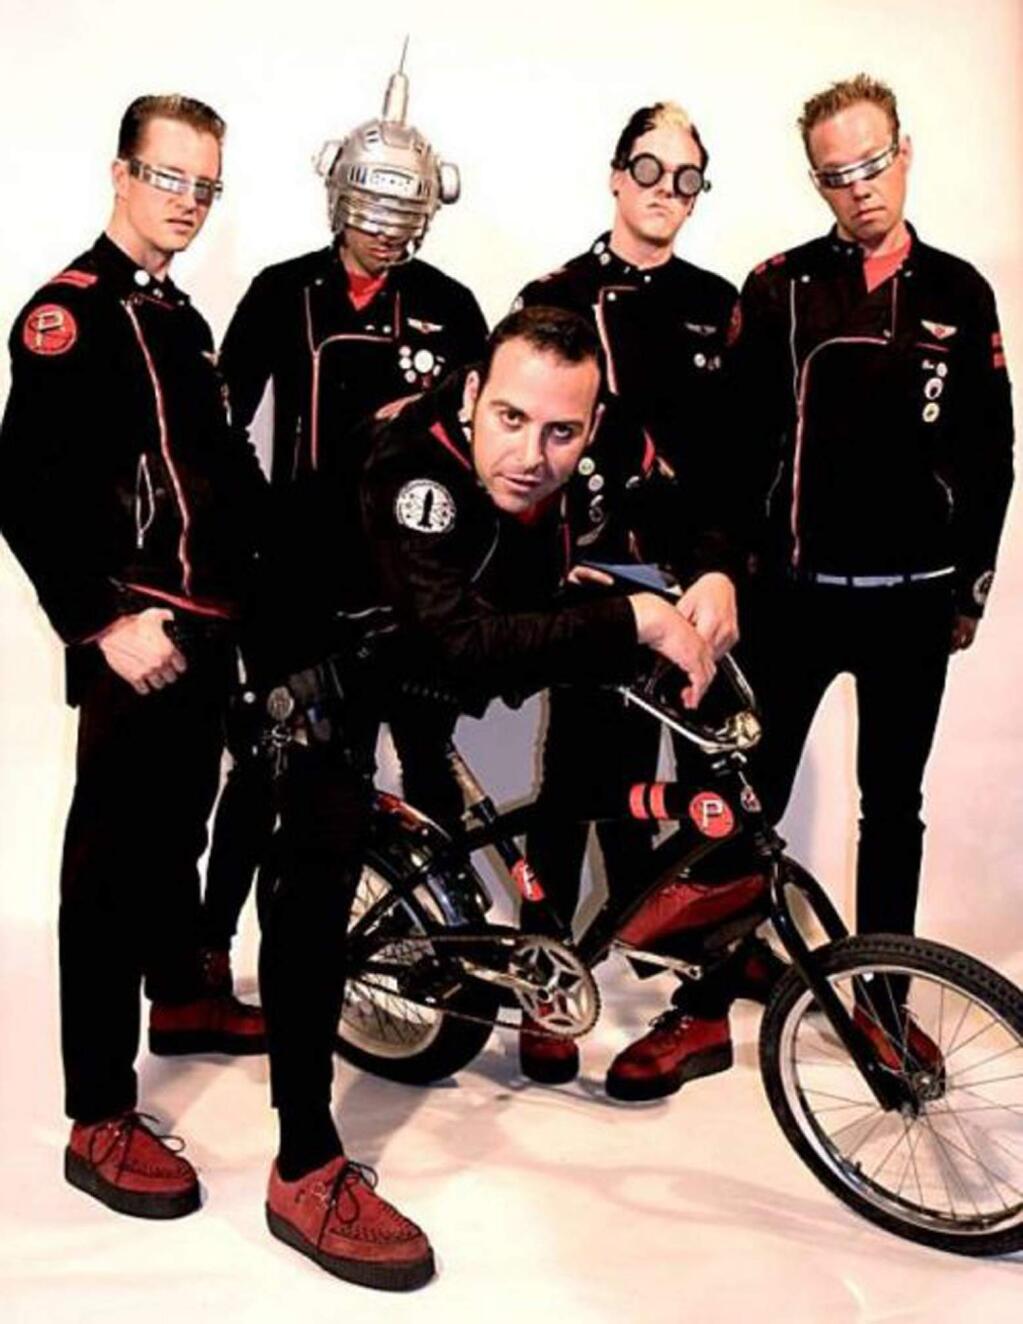 The Phenomenauts perform rockabilly, punk rock, new wave, surf rock and formed in 2000 in Oakland. They also use their music to promote science education and learning. (HANDOUT)